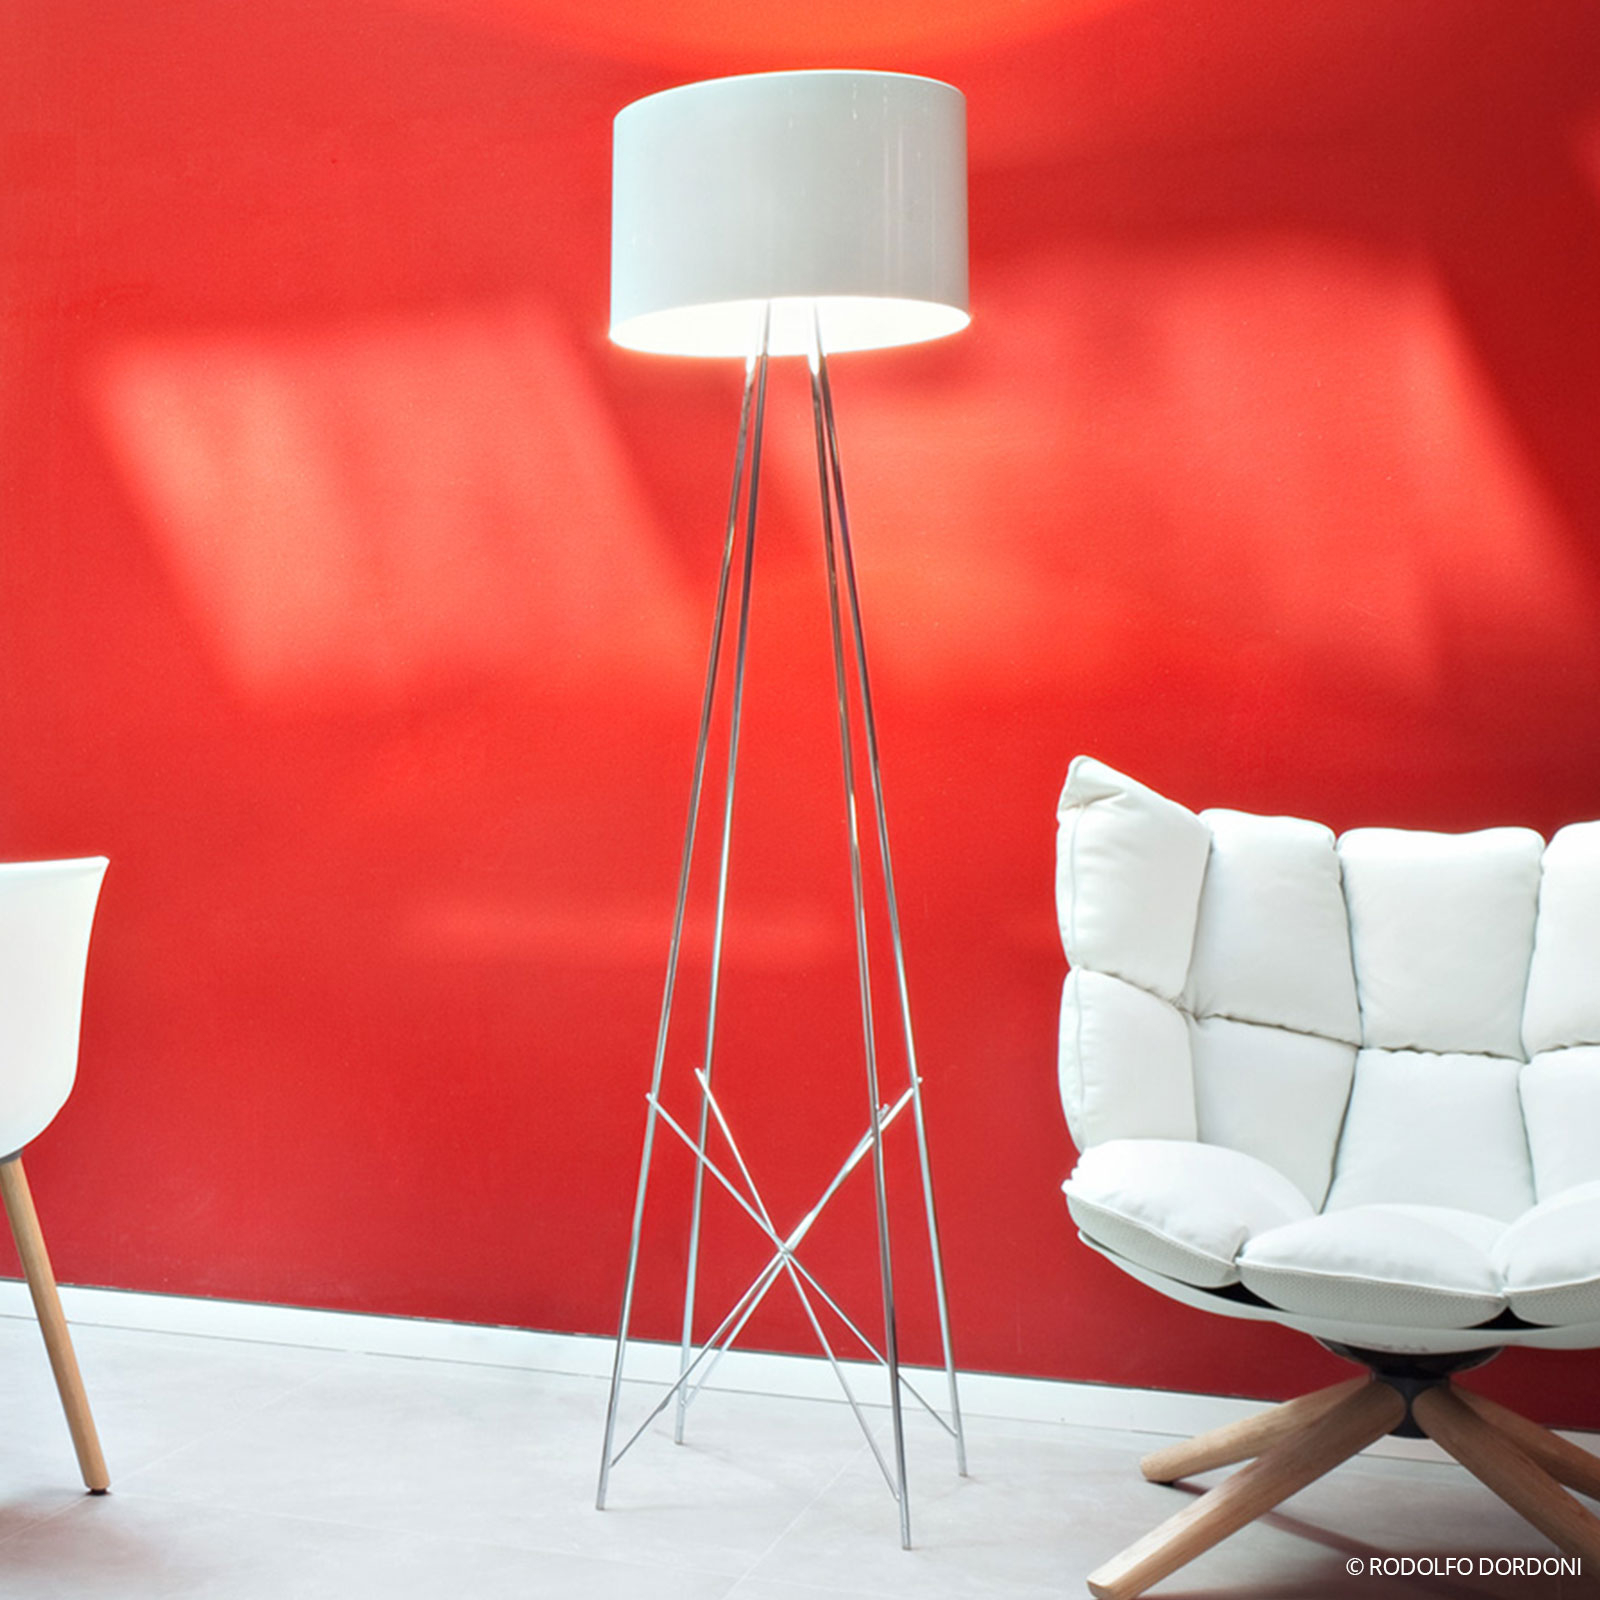 FLOS RAY F2 - Floor lamp with white lampshade